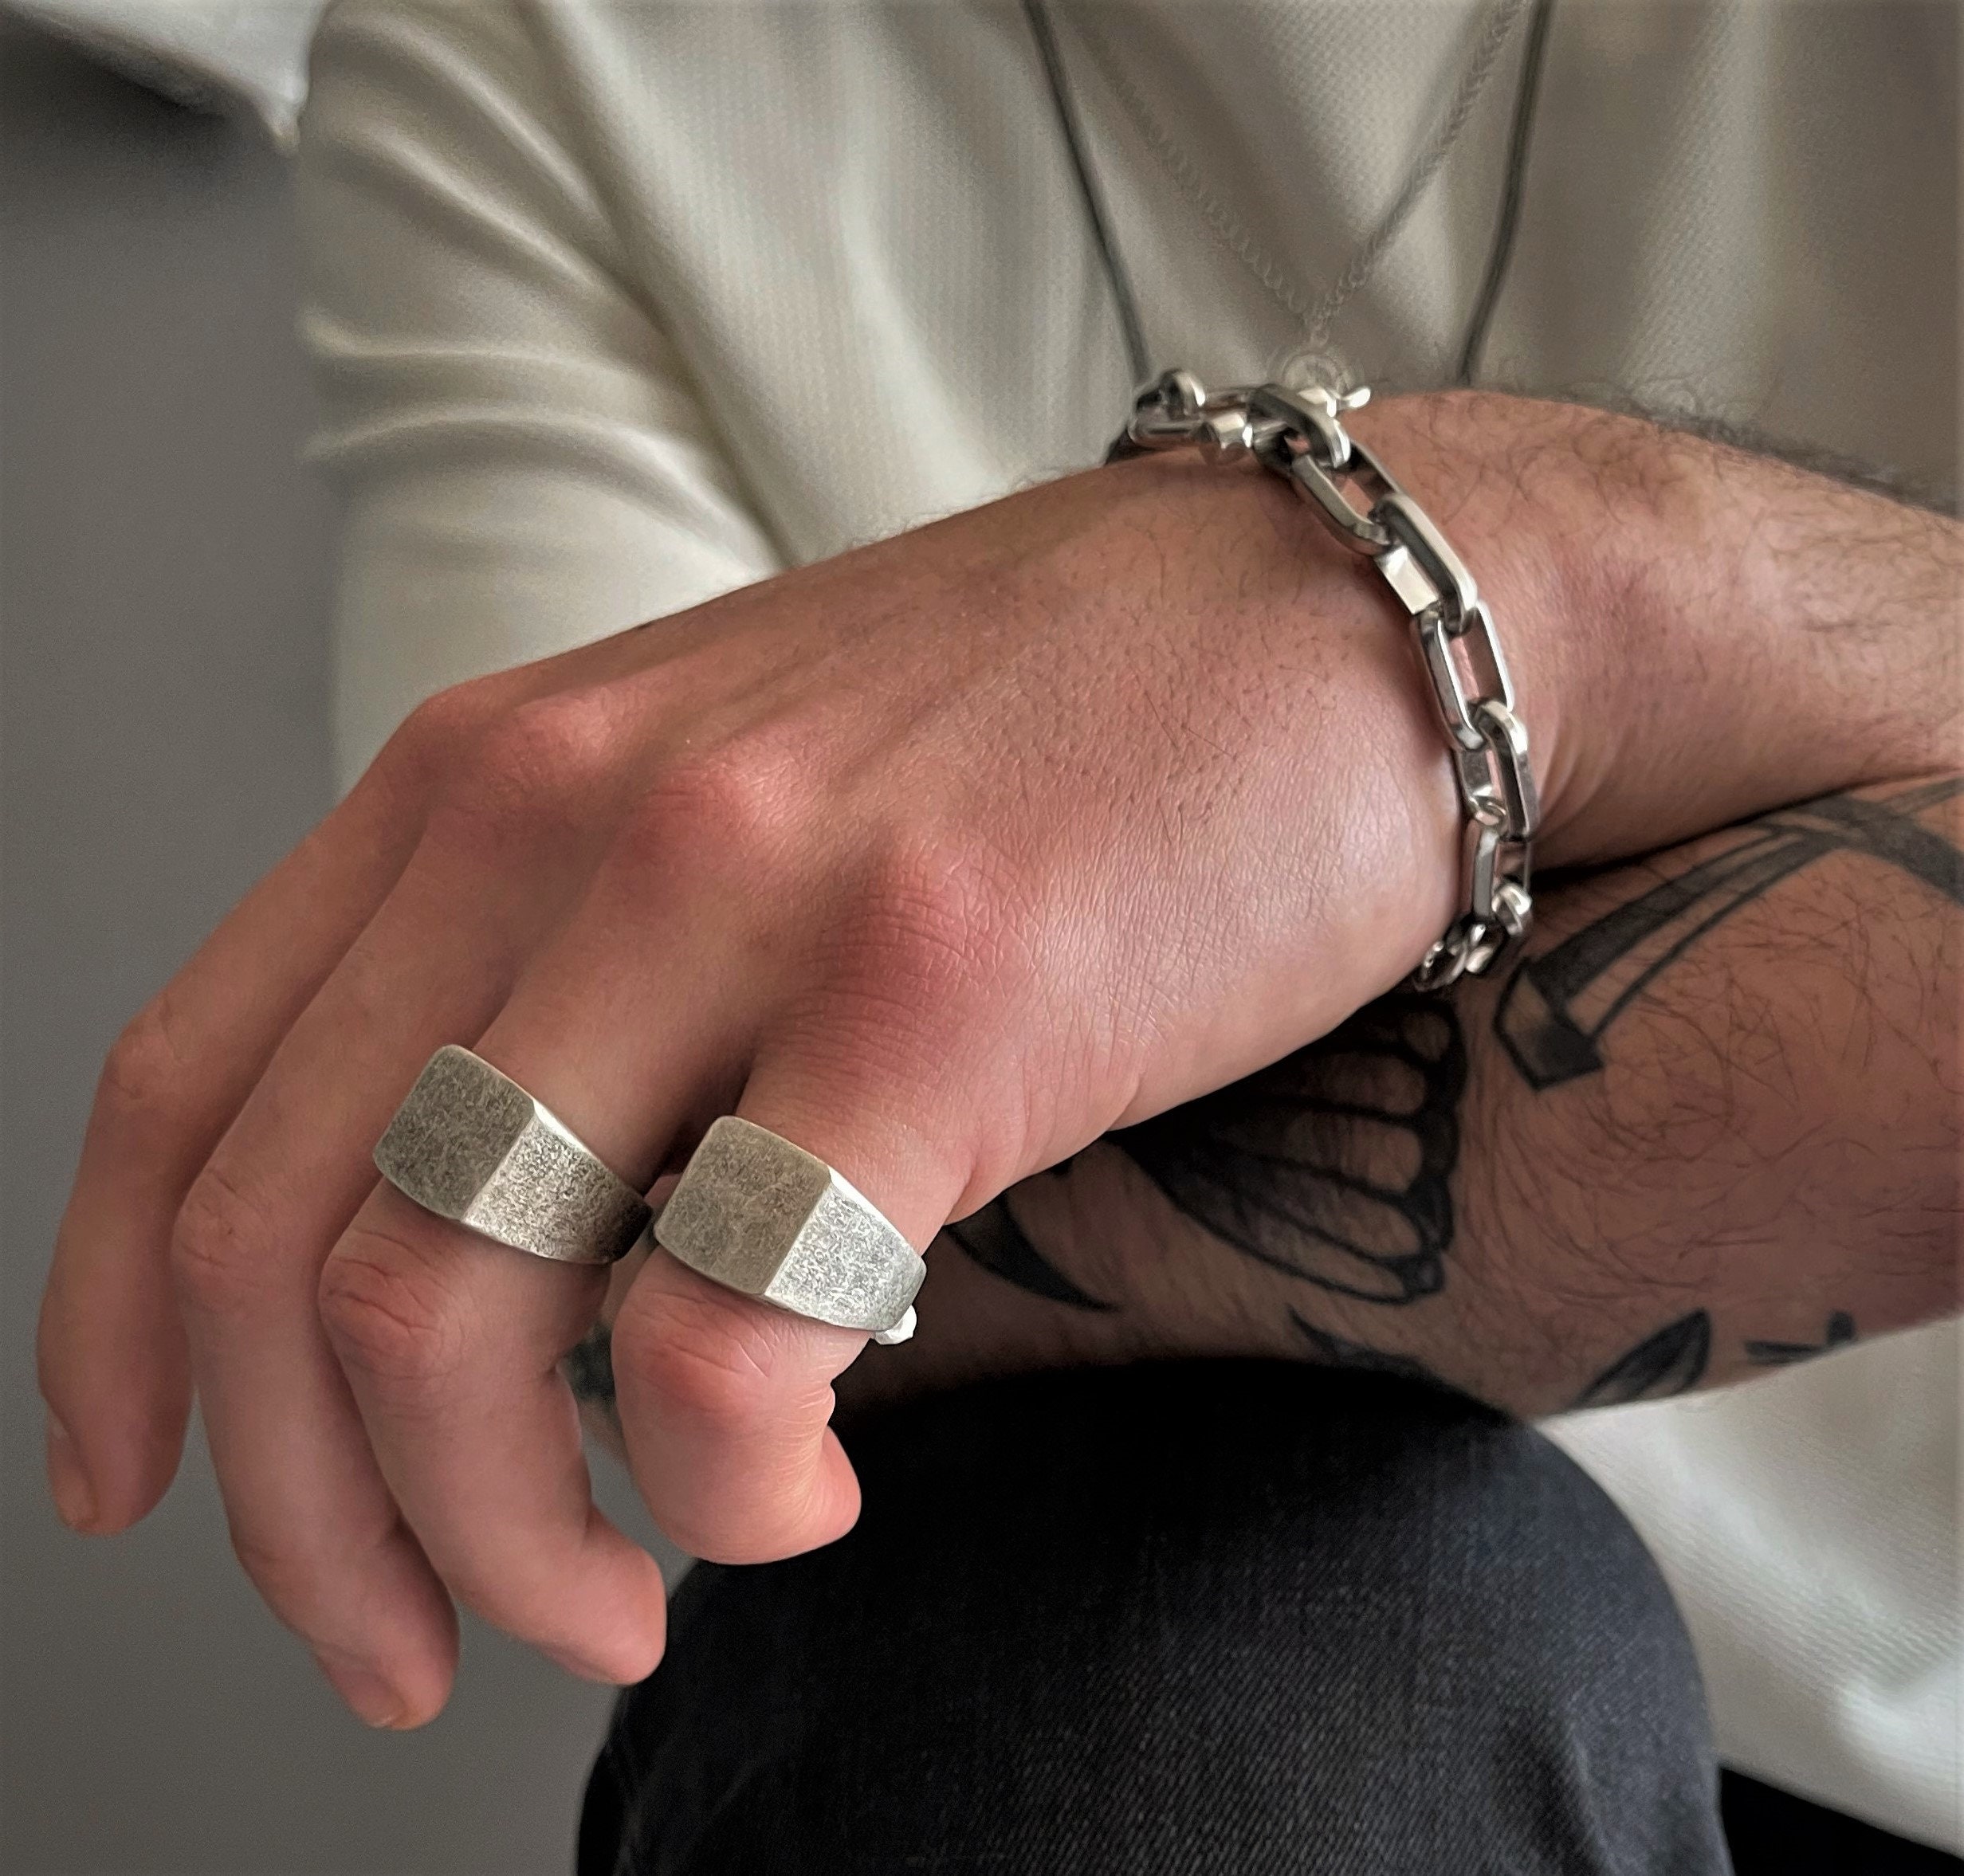 Stylish Stainless Steel Link Bracelet For Men Chunky Grunge Design With  Chain Knot Raym22 From Trumanessa, $10.8